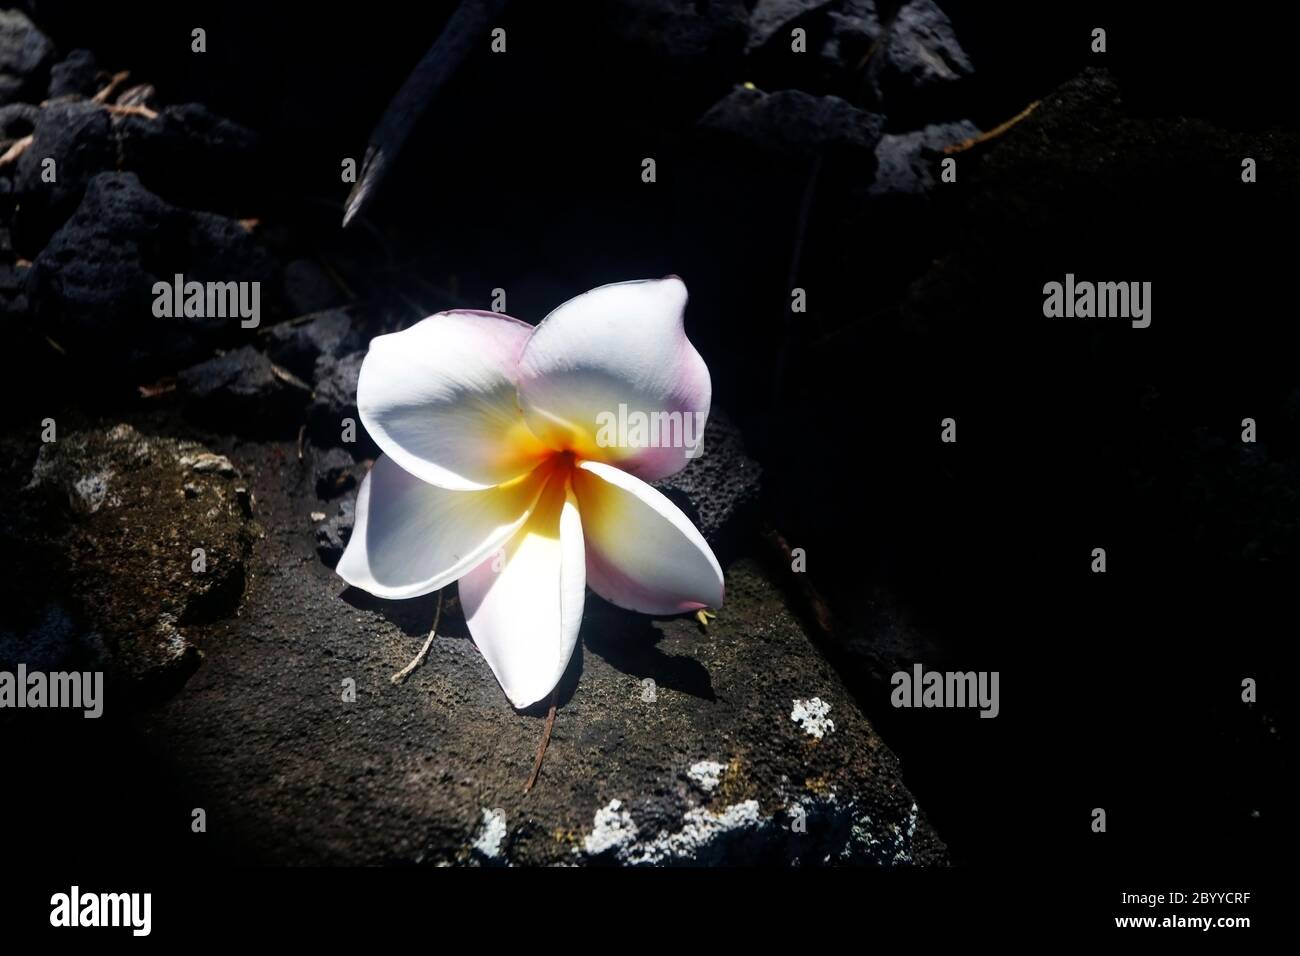 Scenic view with white frangipani flower in sunlight on the shadowed black lava stones. Hawaii Big Island, USA. Stock Photo